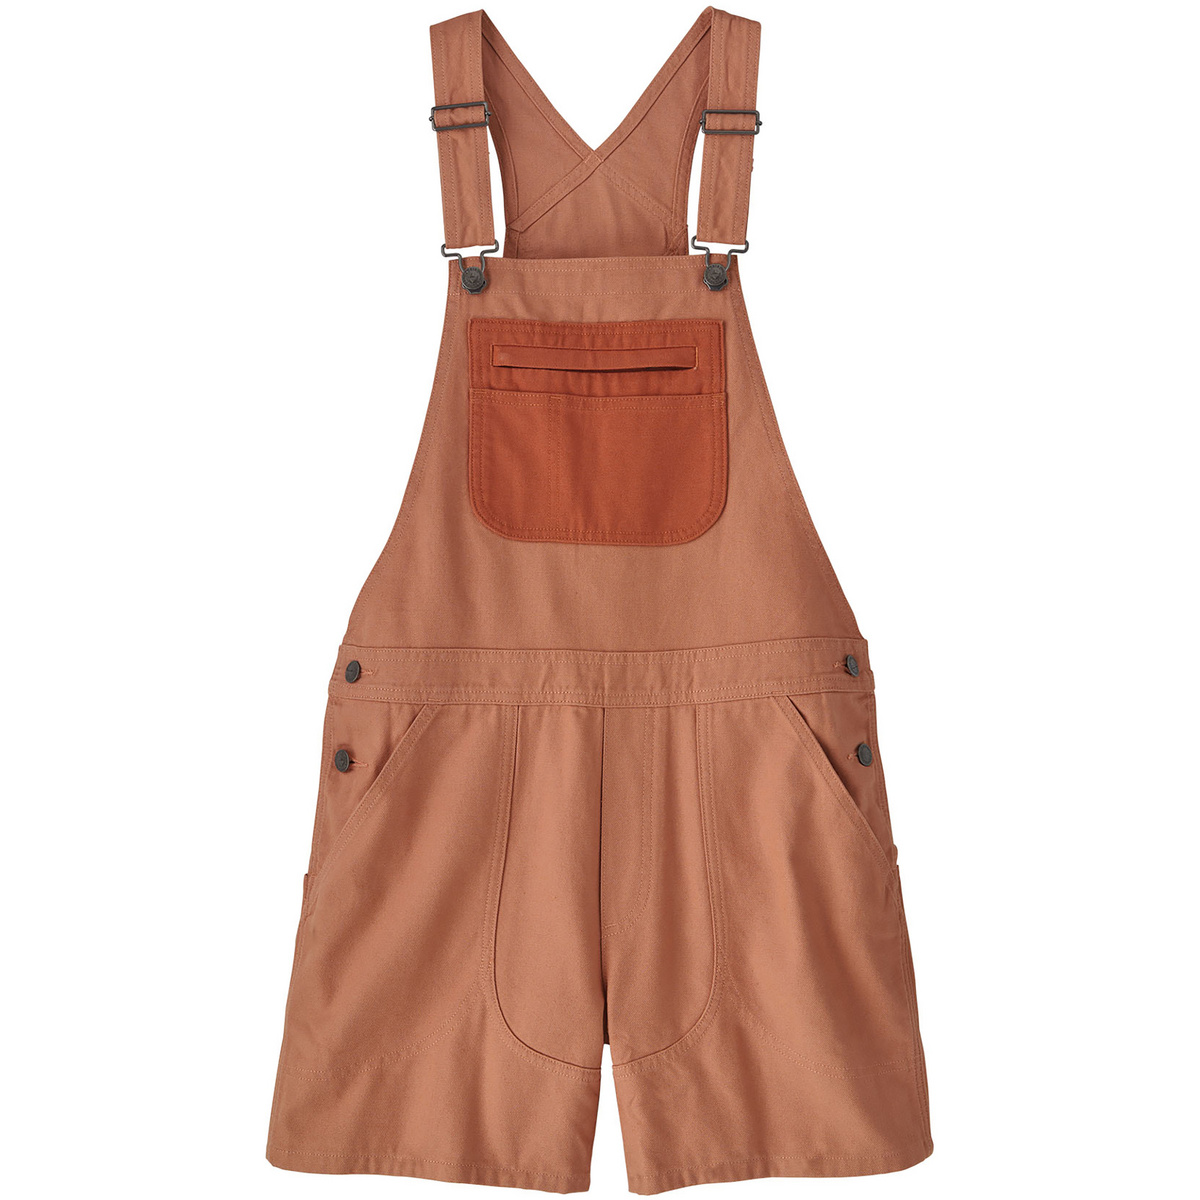 Patagonia Damen Stand Up Overall von Patagonia